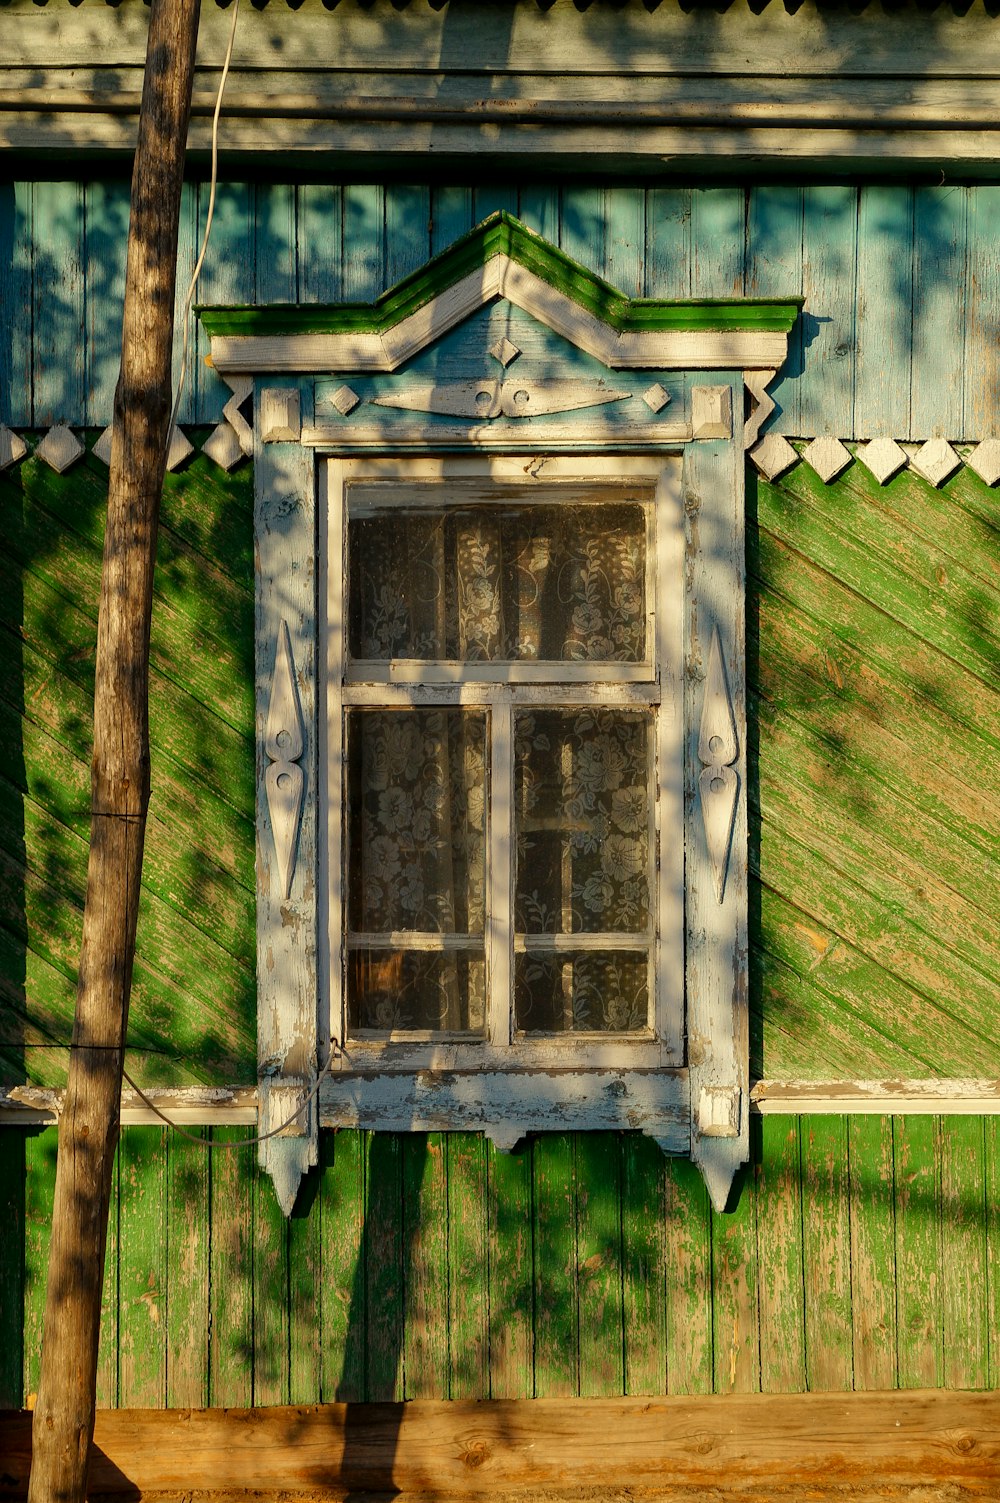 a window on the side of a green building